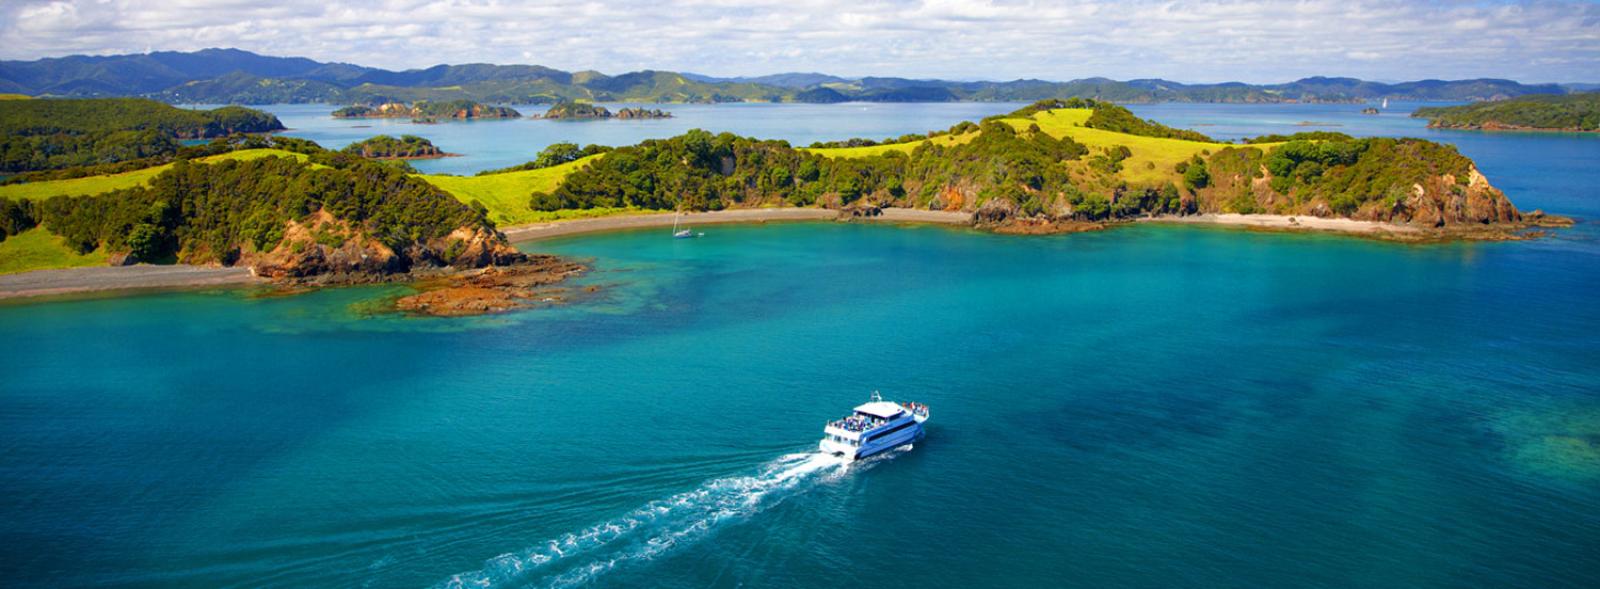 A ferry crosses the tranquil of the Bay of Islands in Northland.